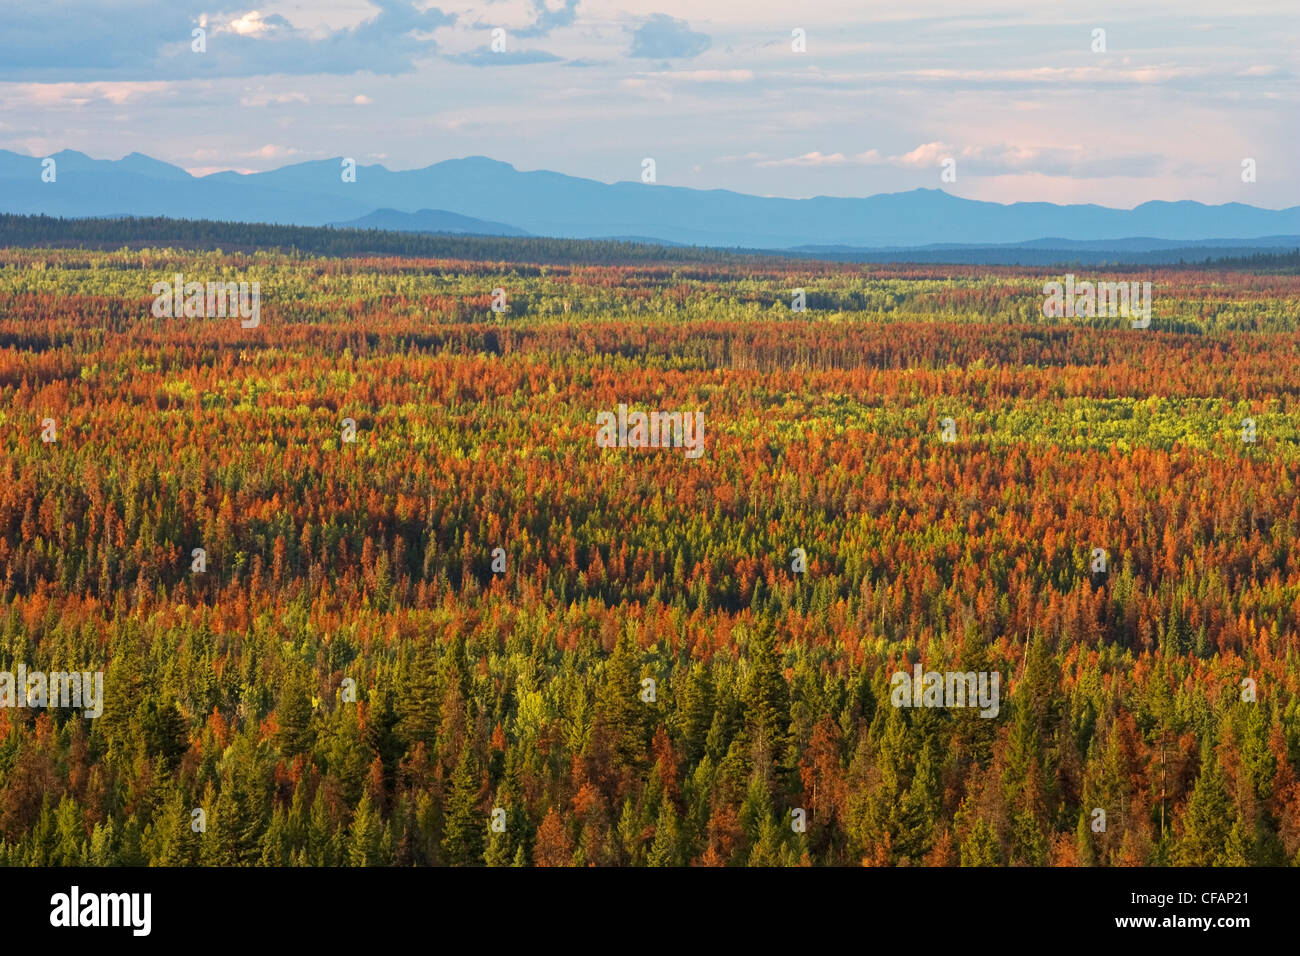 Aerial view of mountain pine beetle infestation in the Cariboo region of British Columbia, Canada Stock Photo